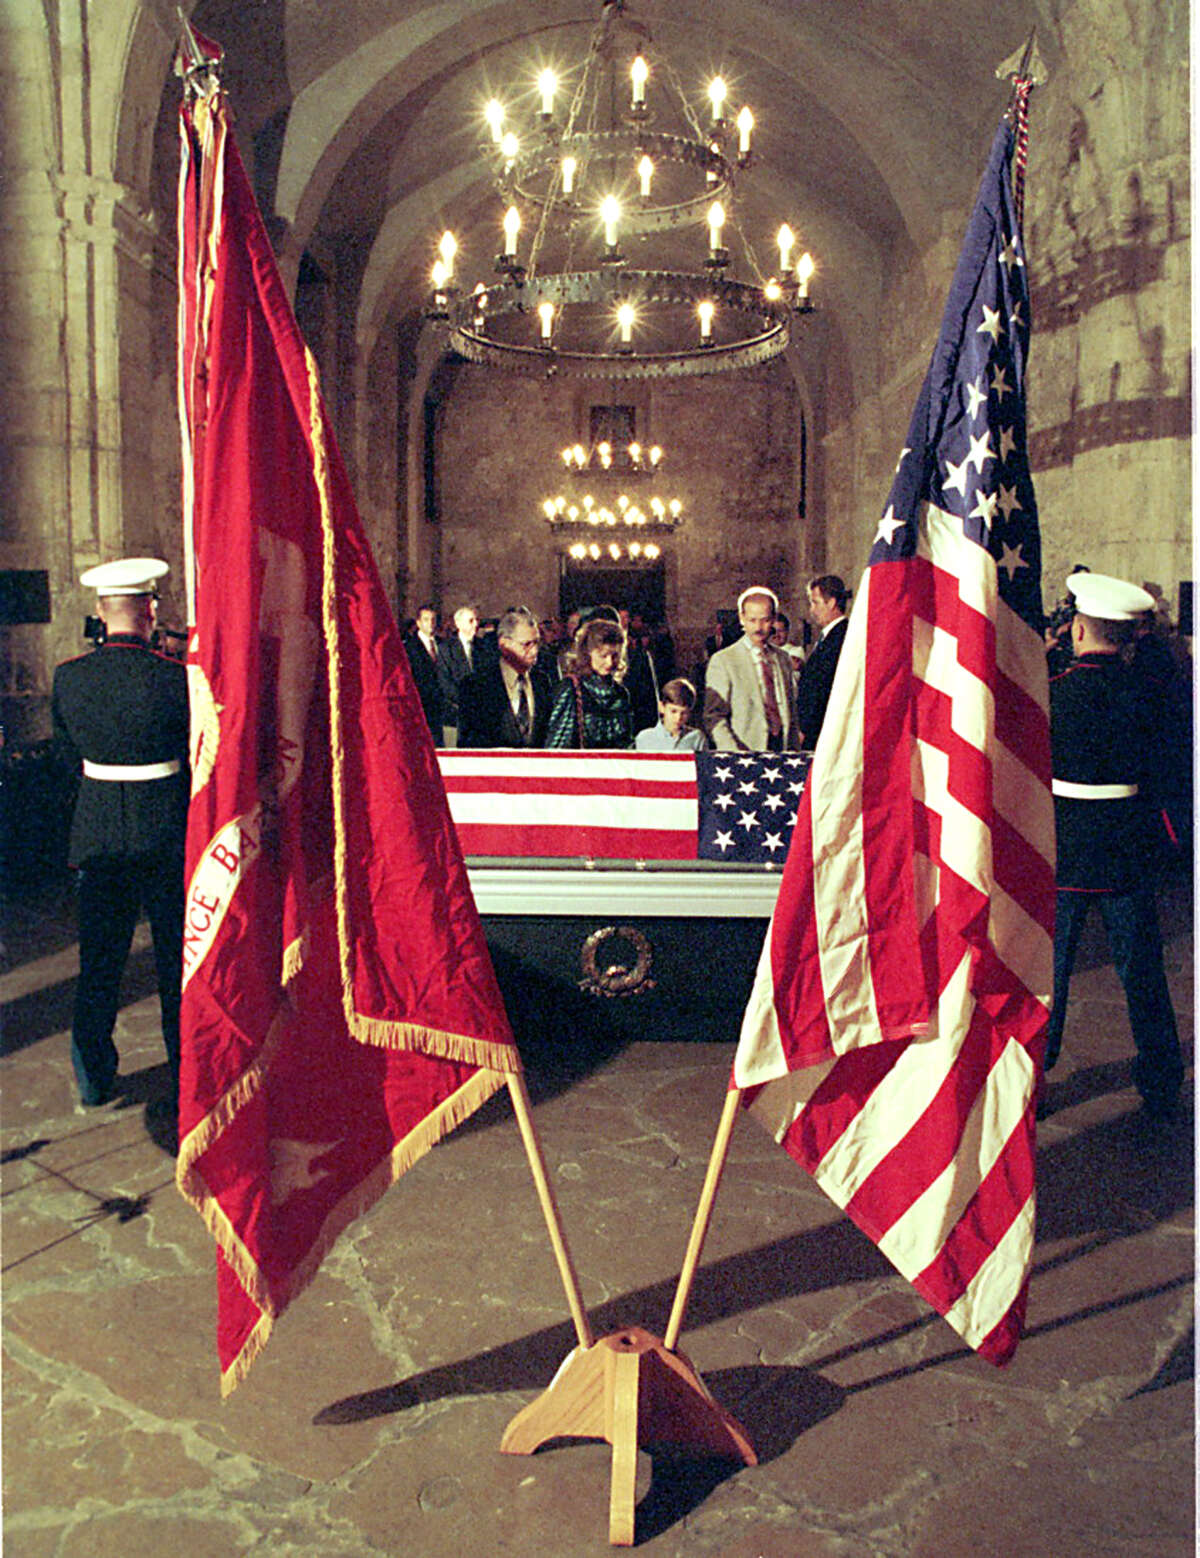 Family members pass Staff Sgt. William James Bordelon’s casket as he lies in repose at the Alamo in 1995. The next day, he was reinterred at Fort Sam Houston National Cemetery.